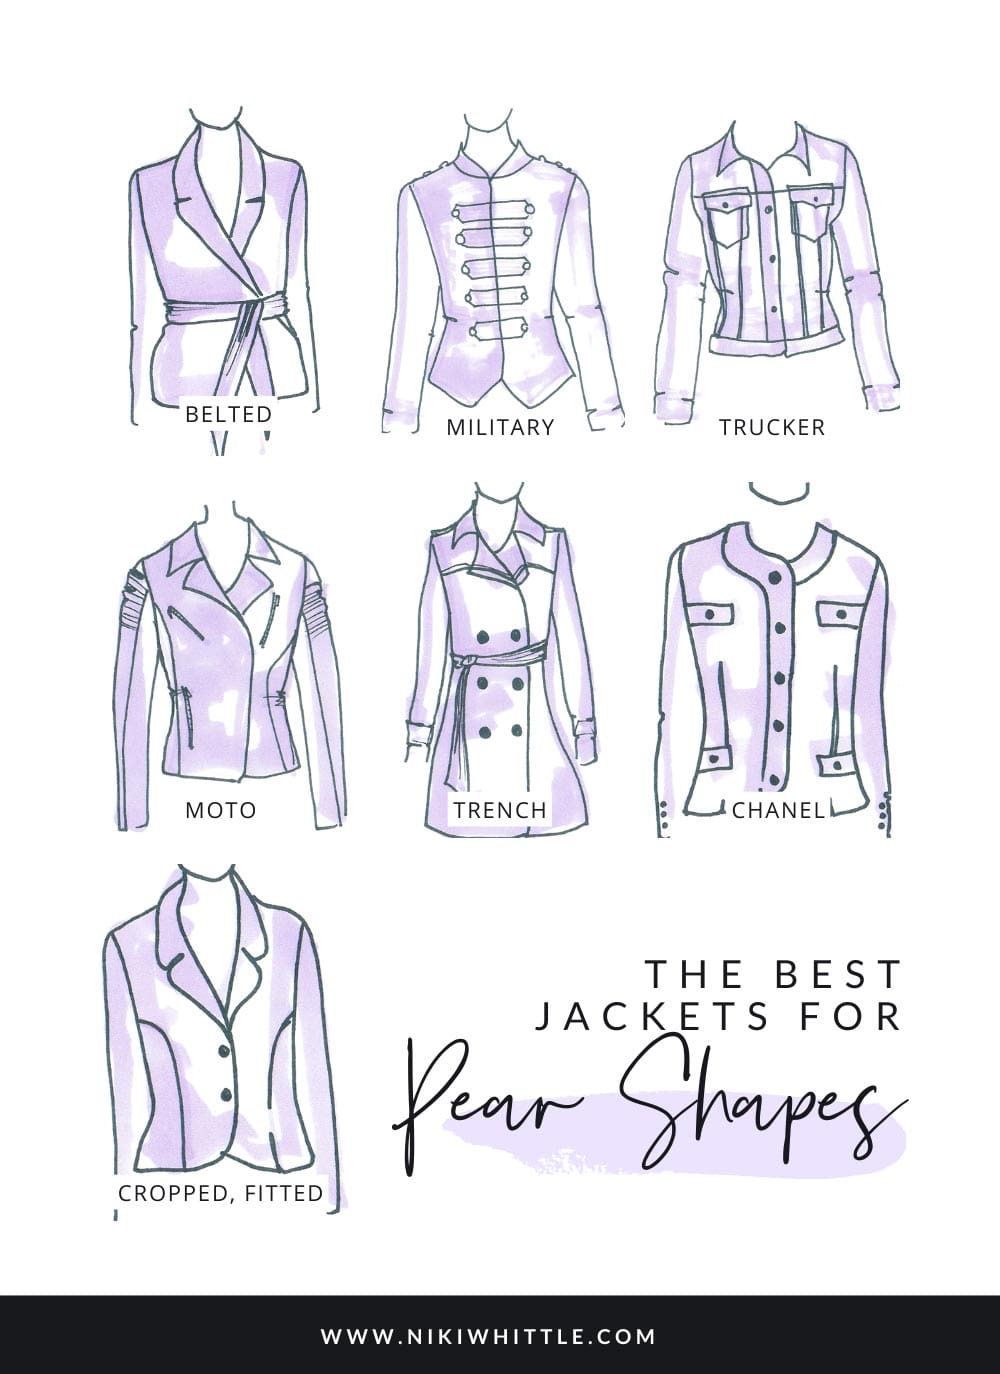 Illustrations of jackets and coats for women